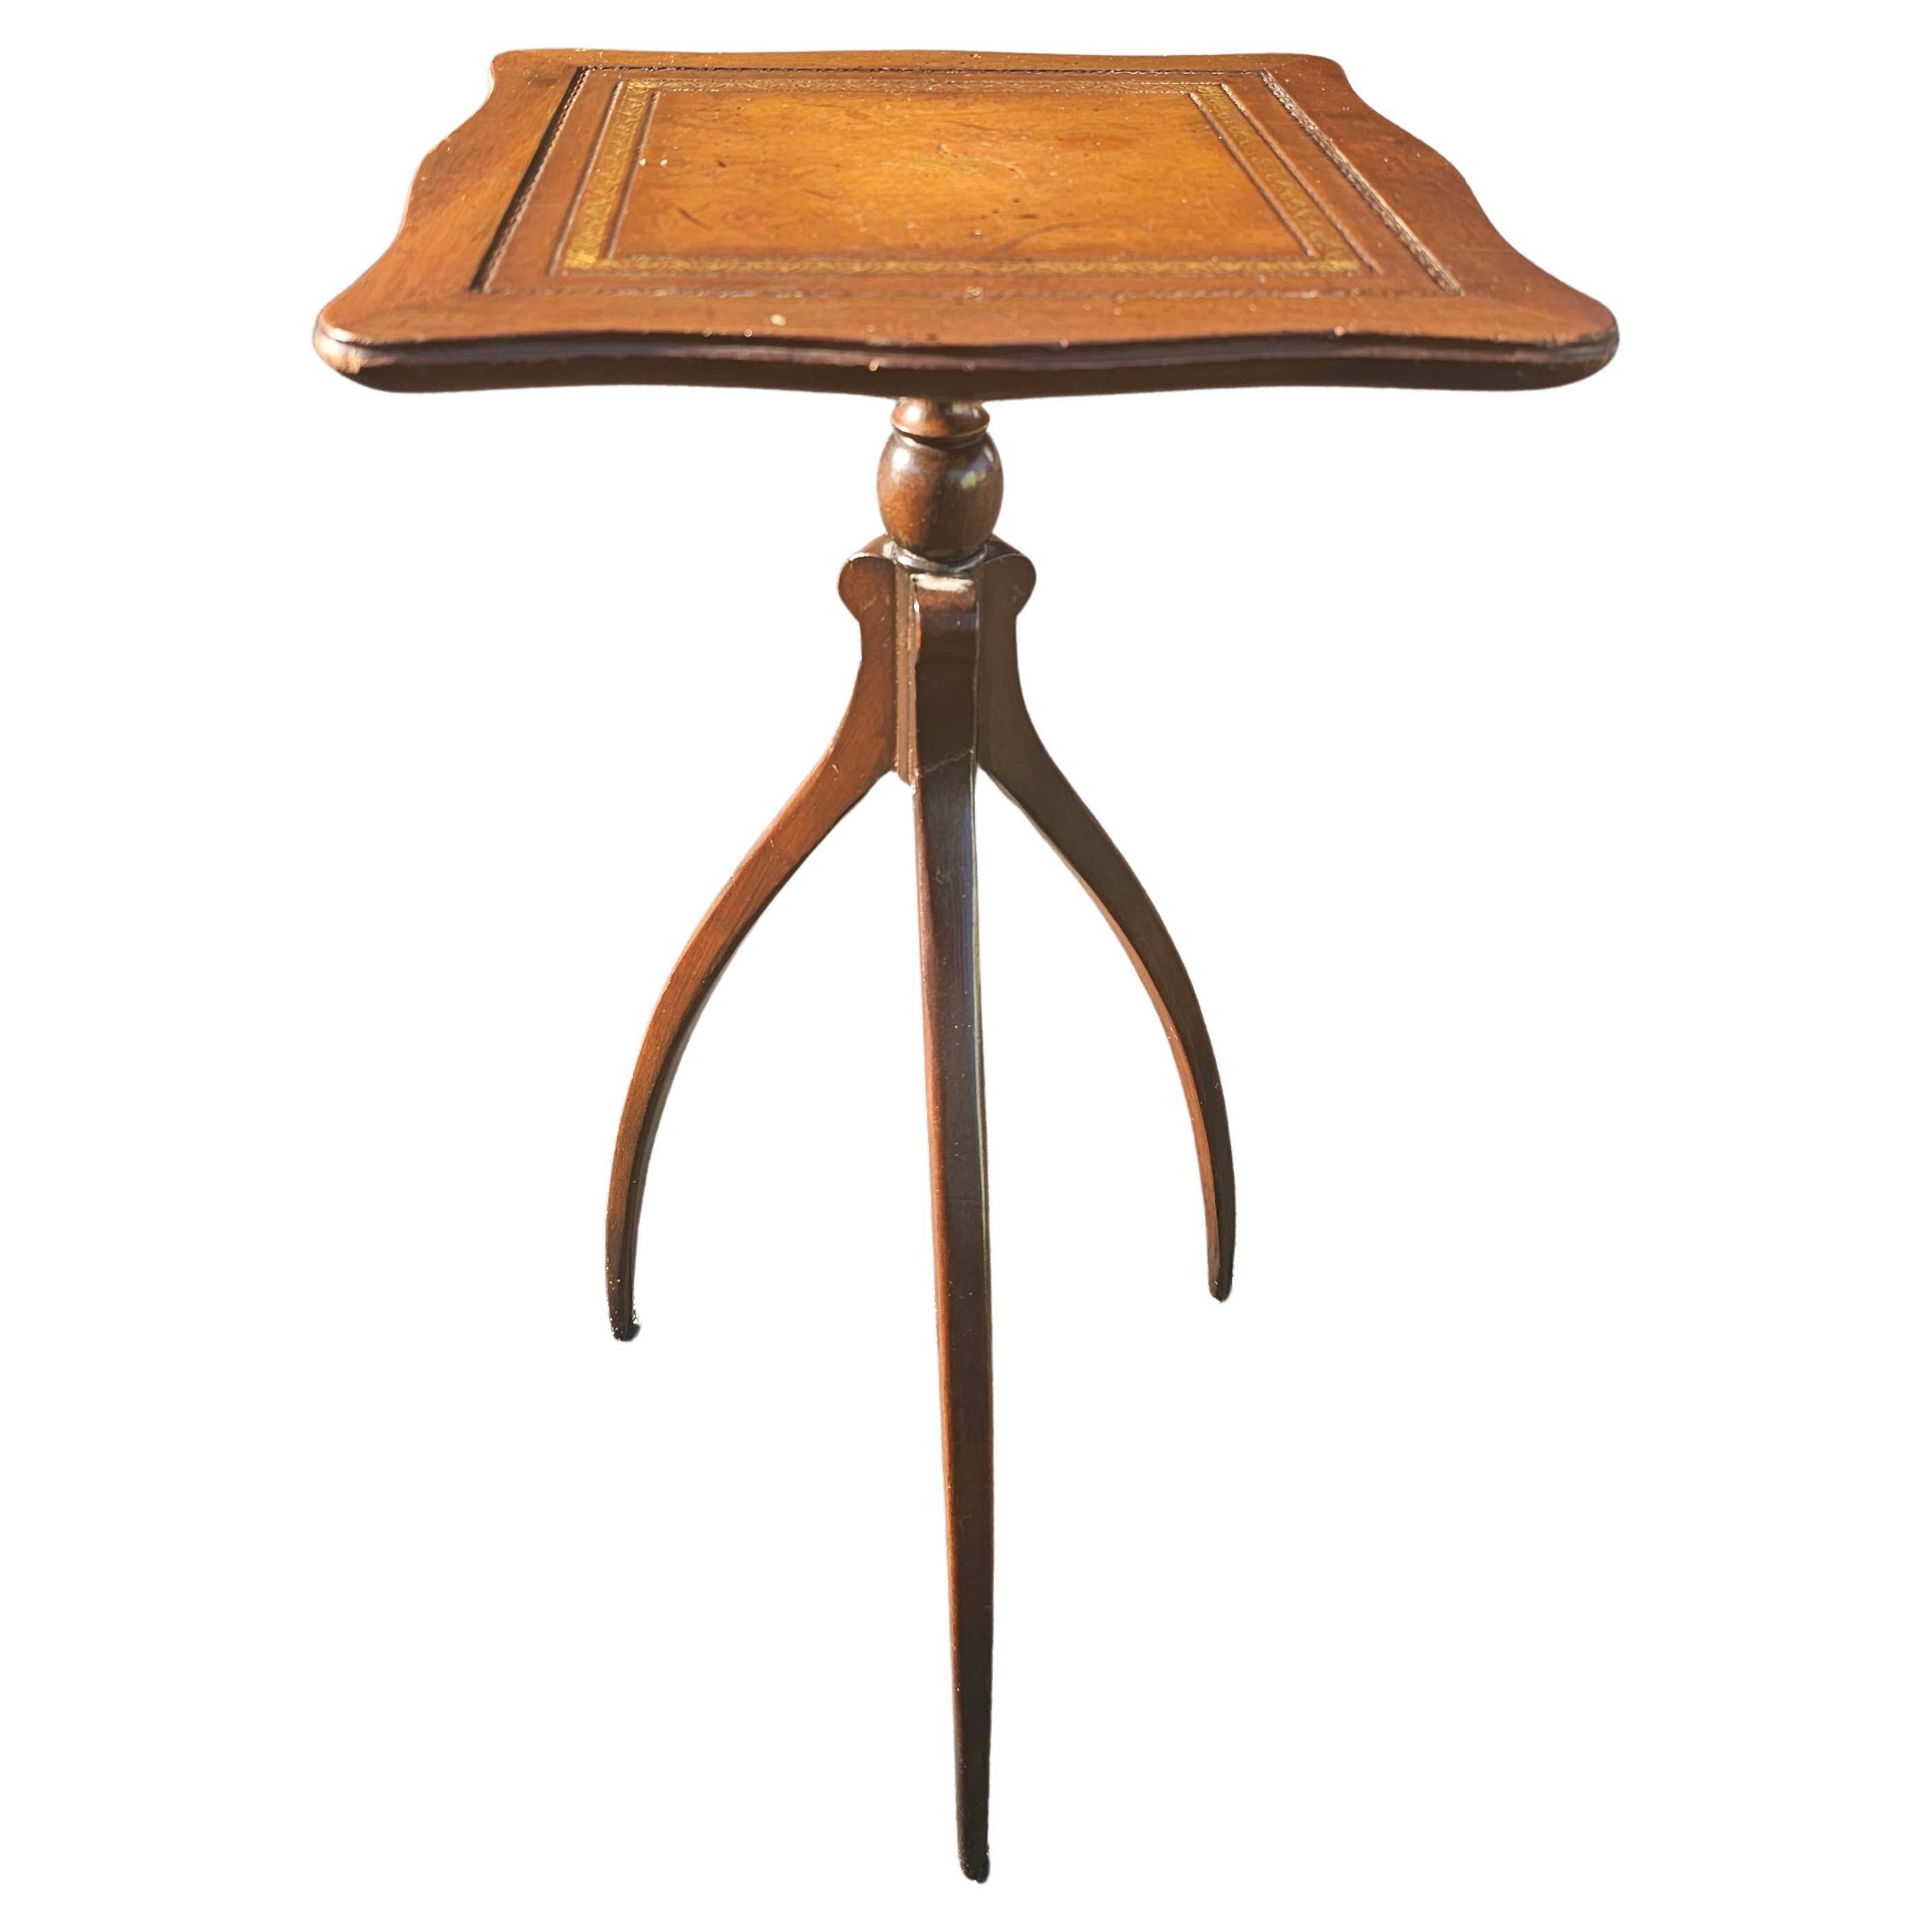 Mid 20th Century Spider Tripod Mahogany and Tooled Leather Top Candle Stand For Sale 2